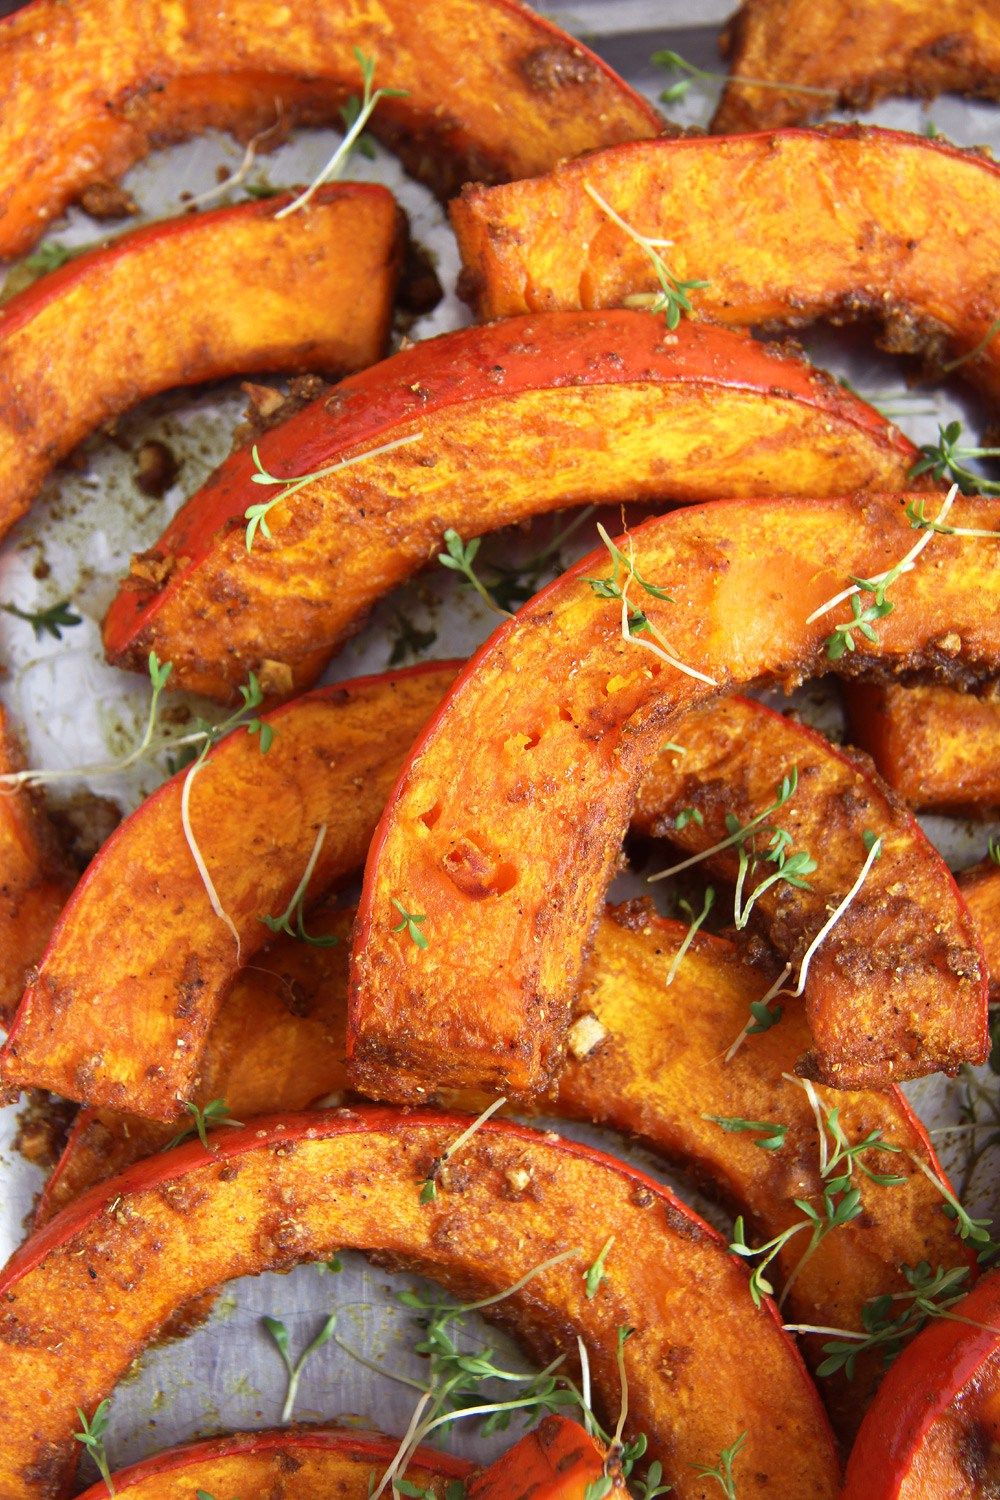 What To Do With Roast Pumpkin